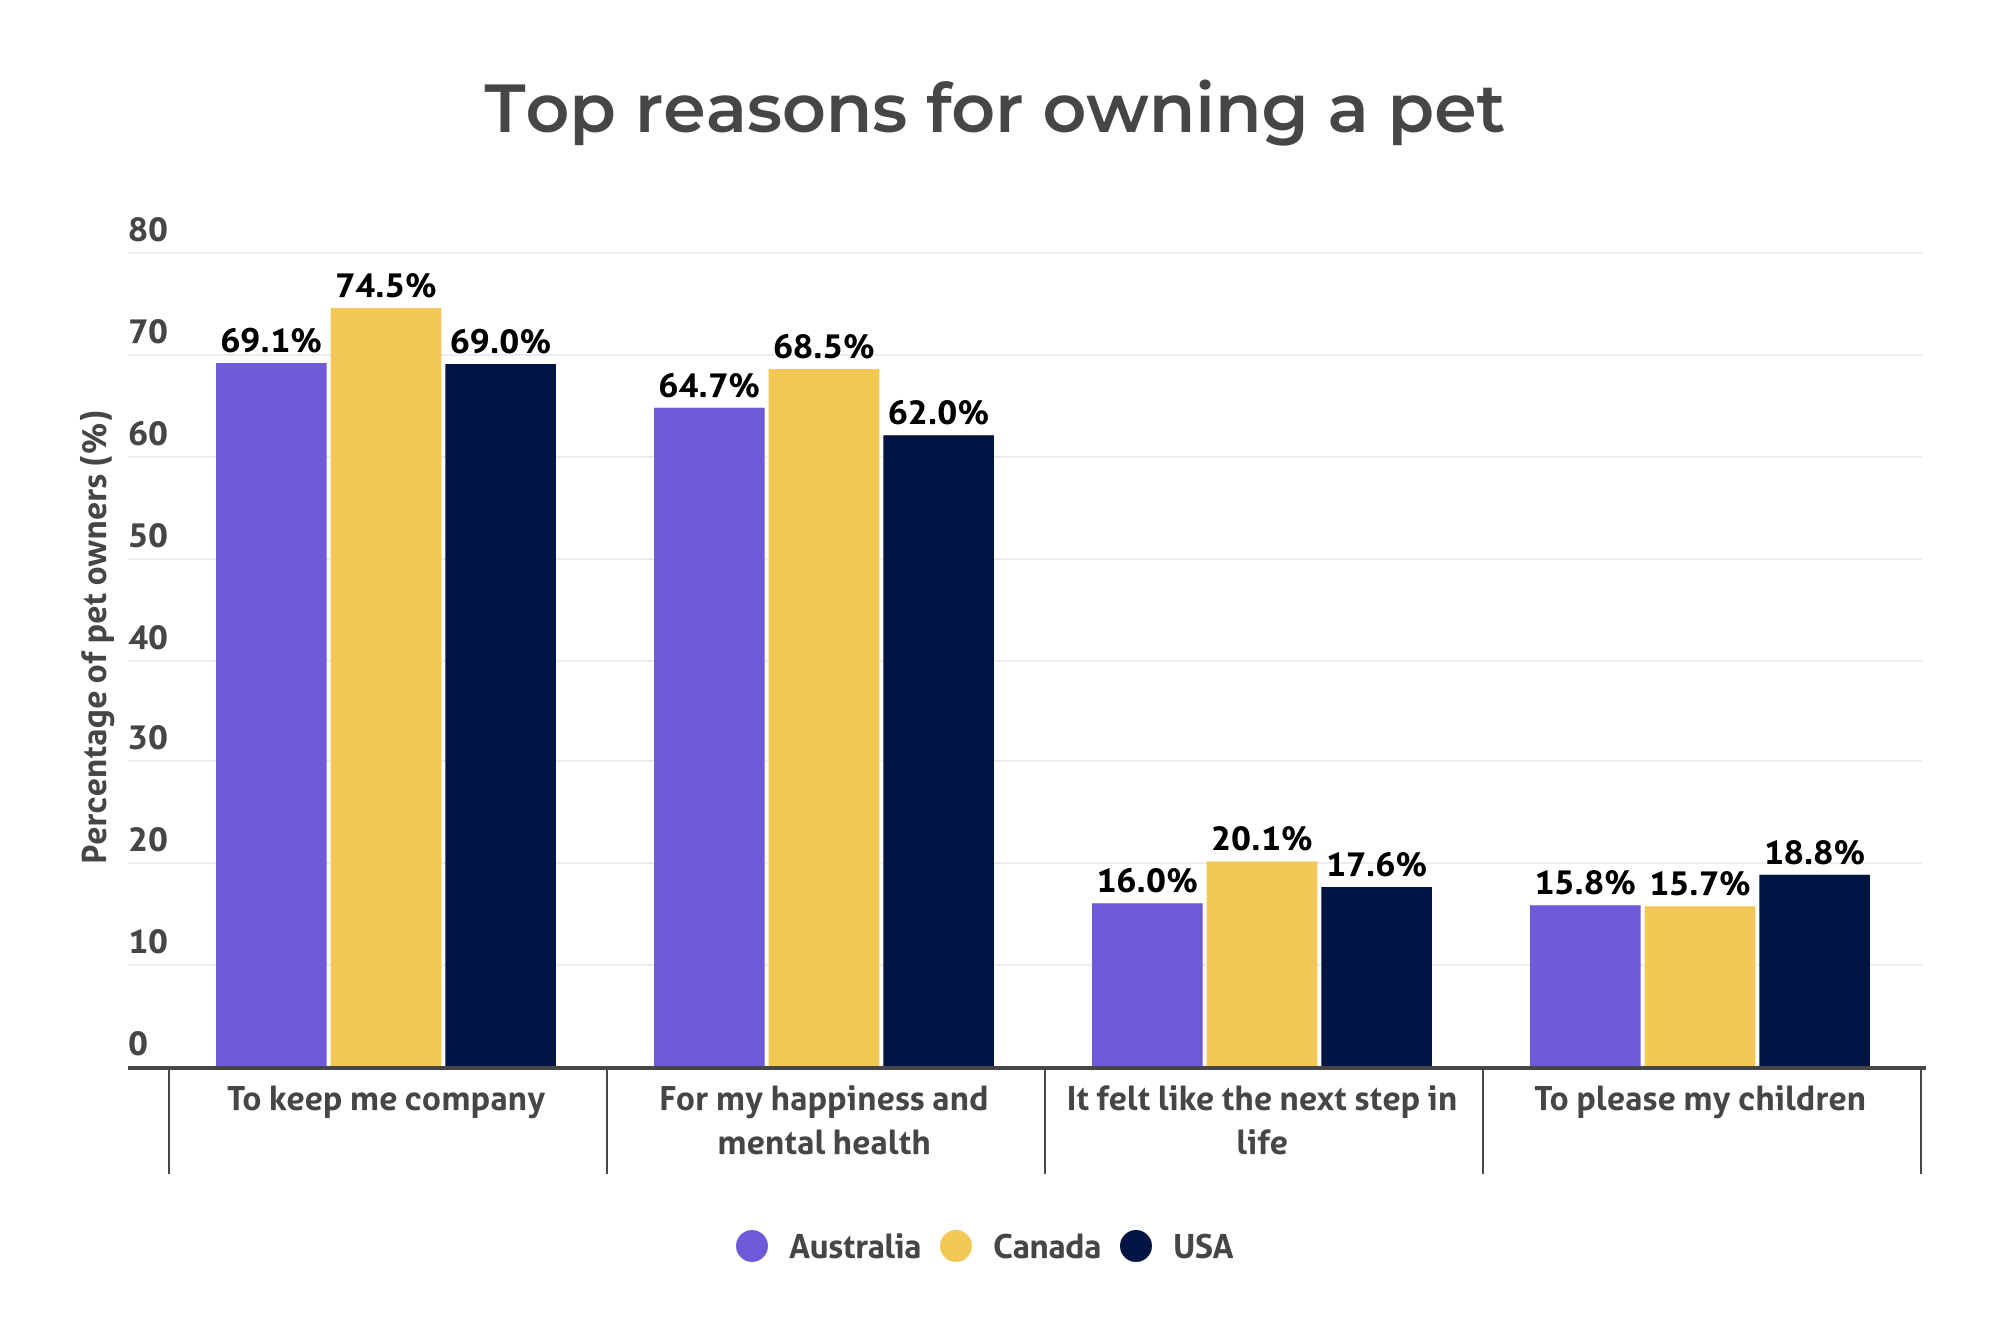 A bar chart showing the top reasons for owning a pet